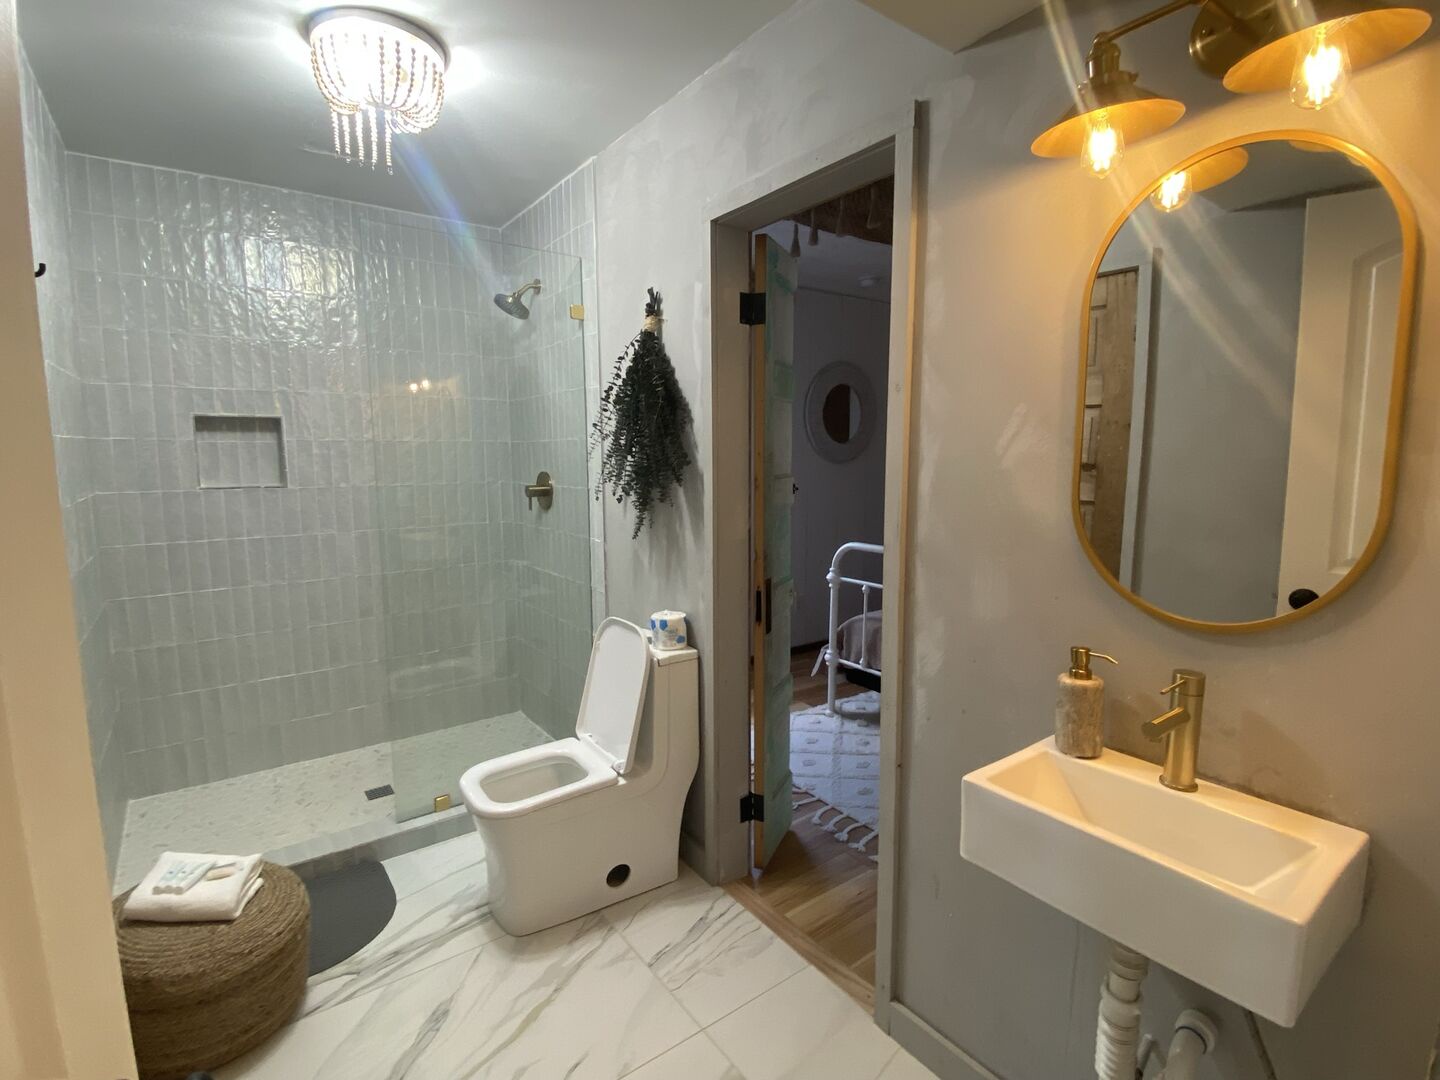 Shared 1st floor bathroom with a walk-in shower